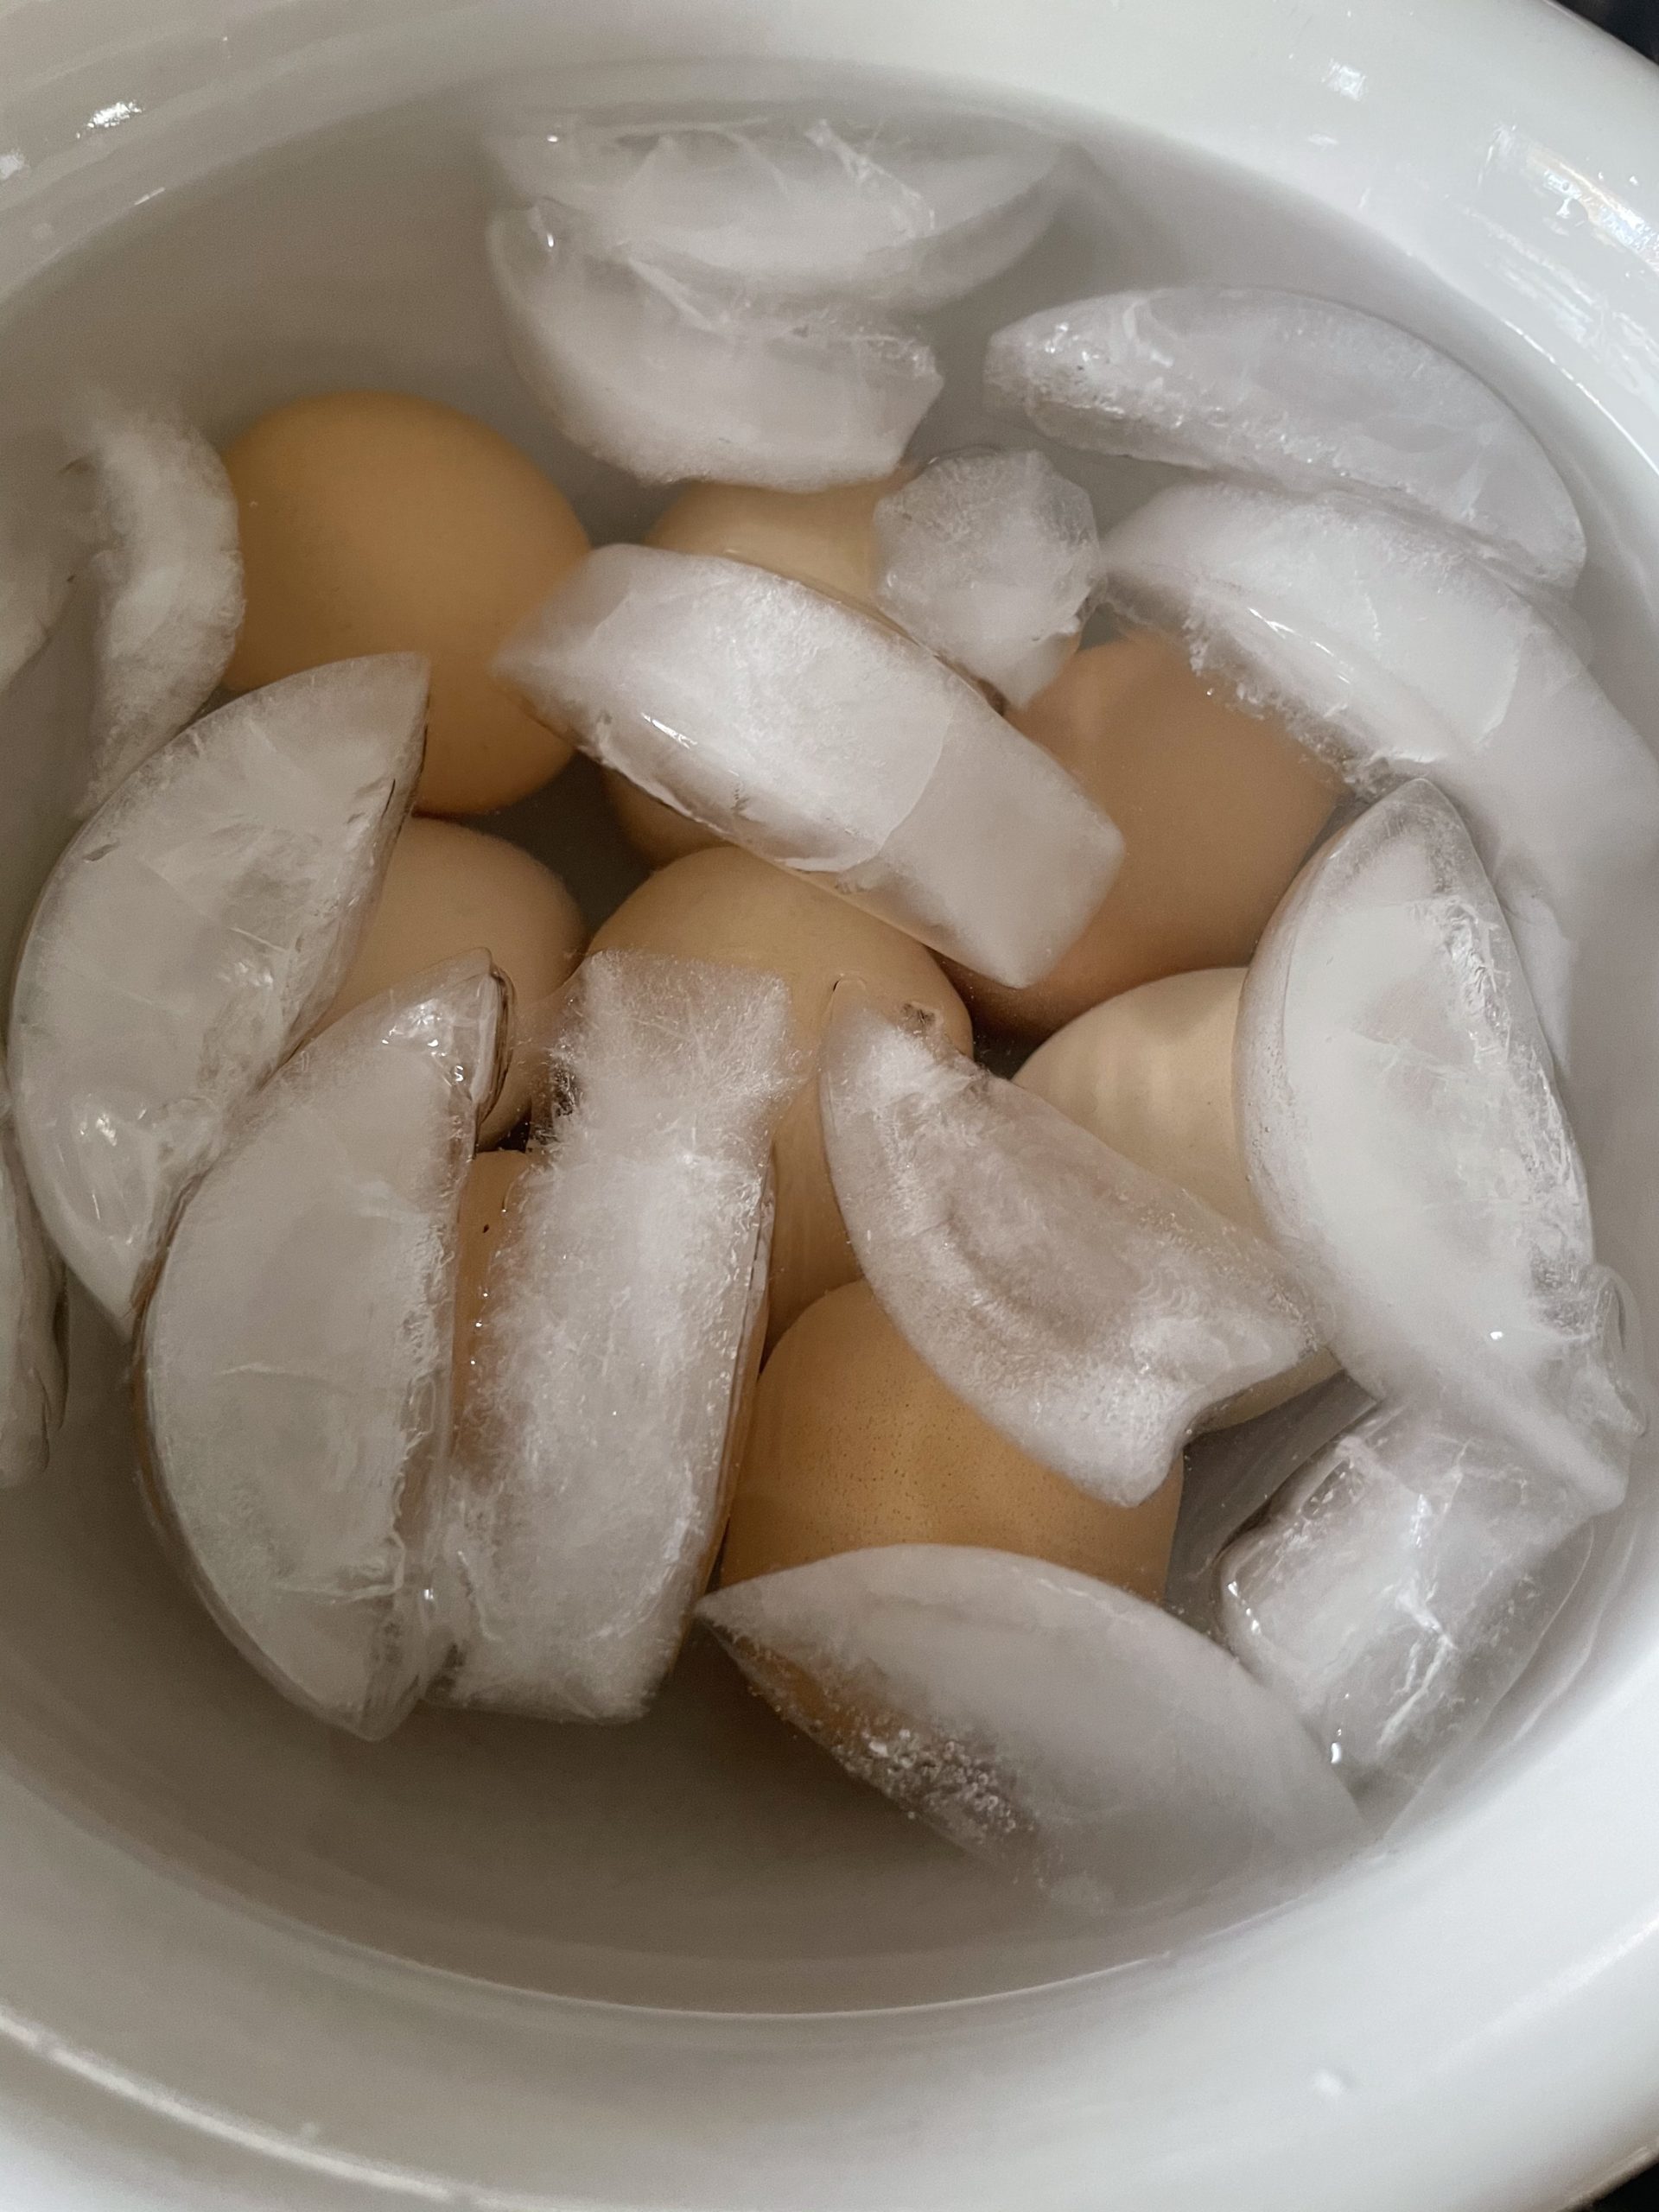 Coiling eggs after boiling